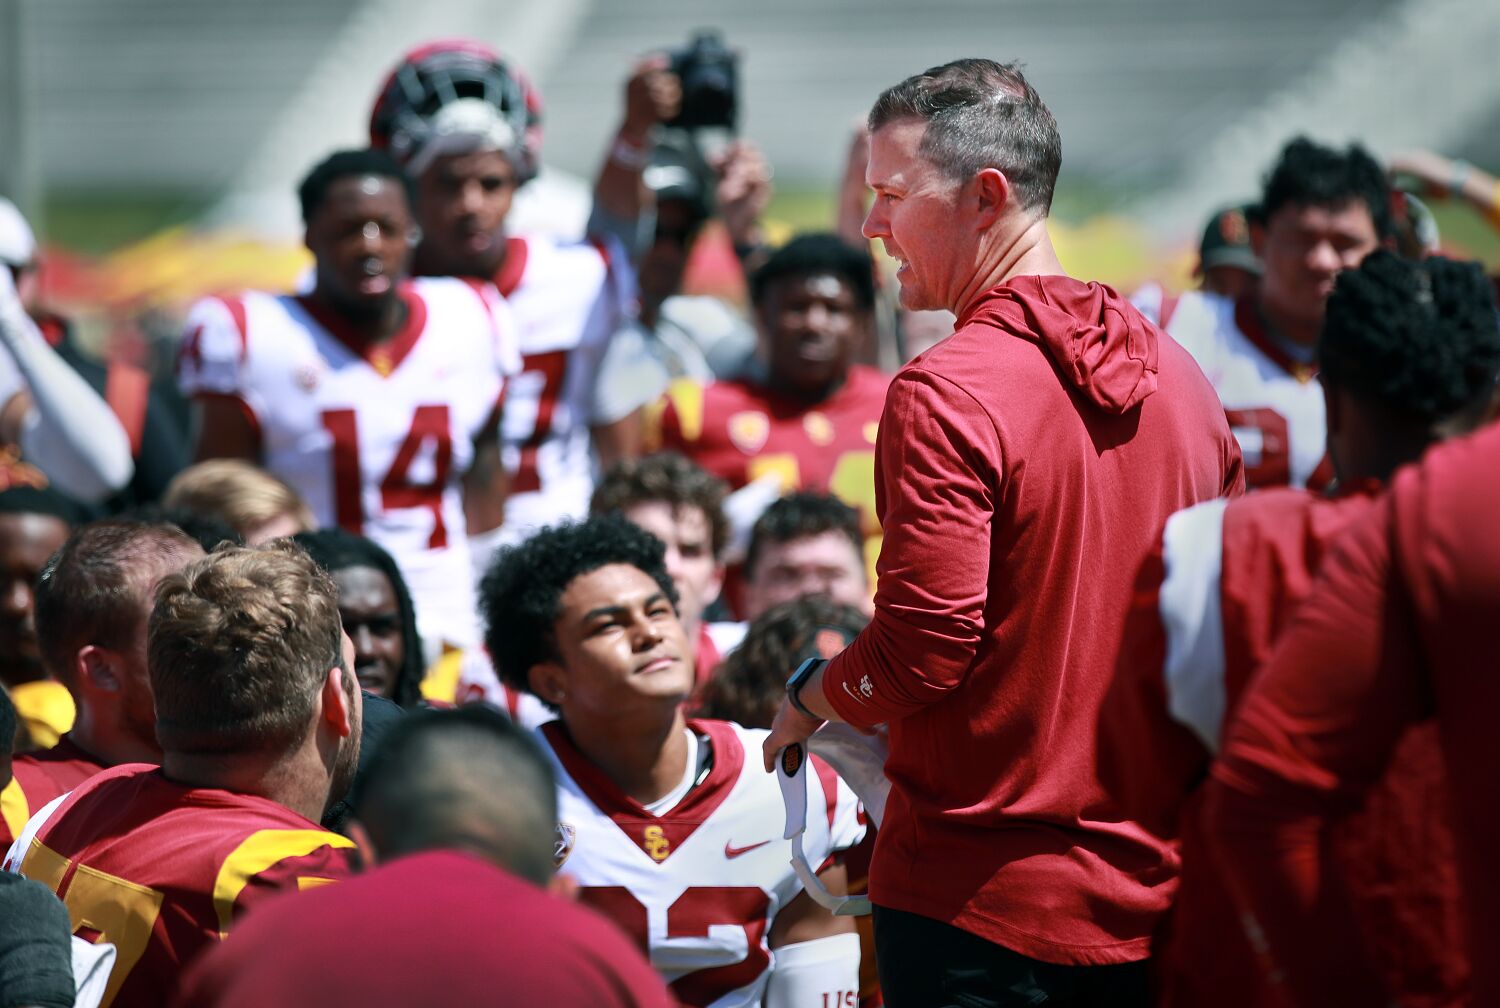 USC football picked to win the Pac-12 Conference in preseason poll